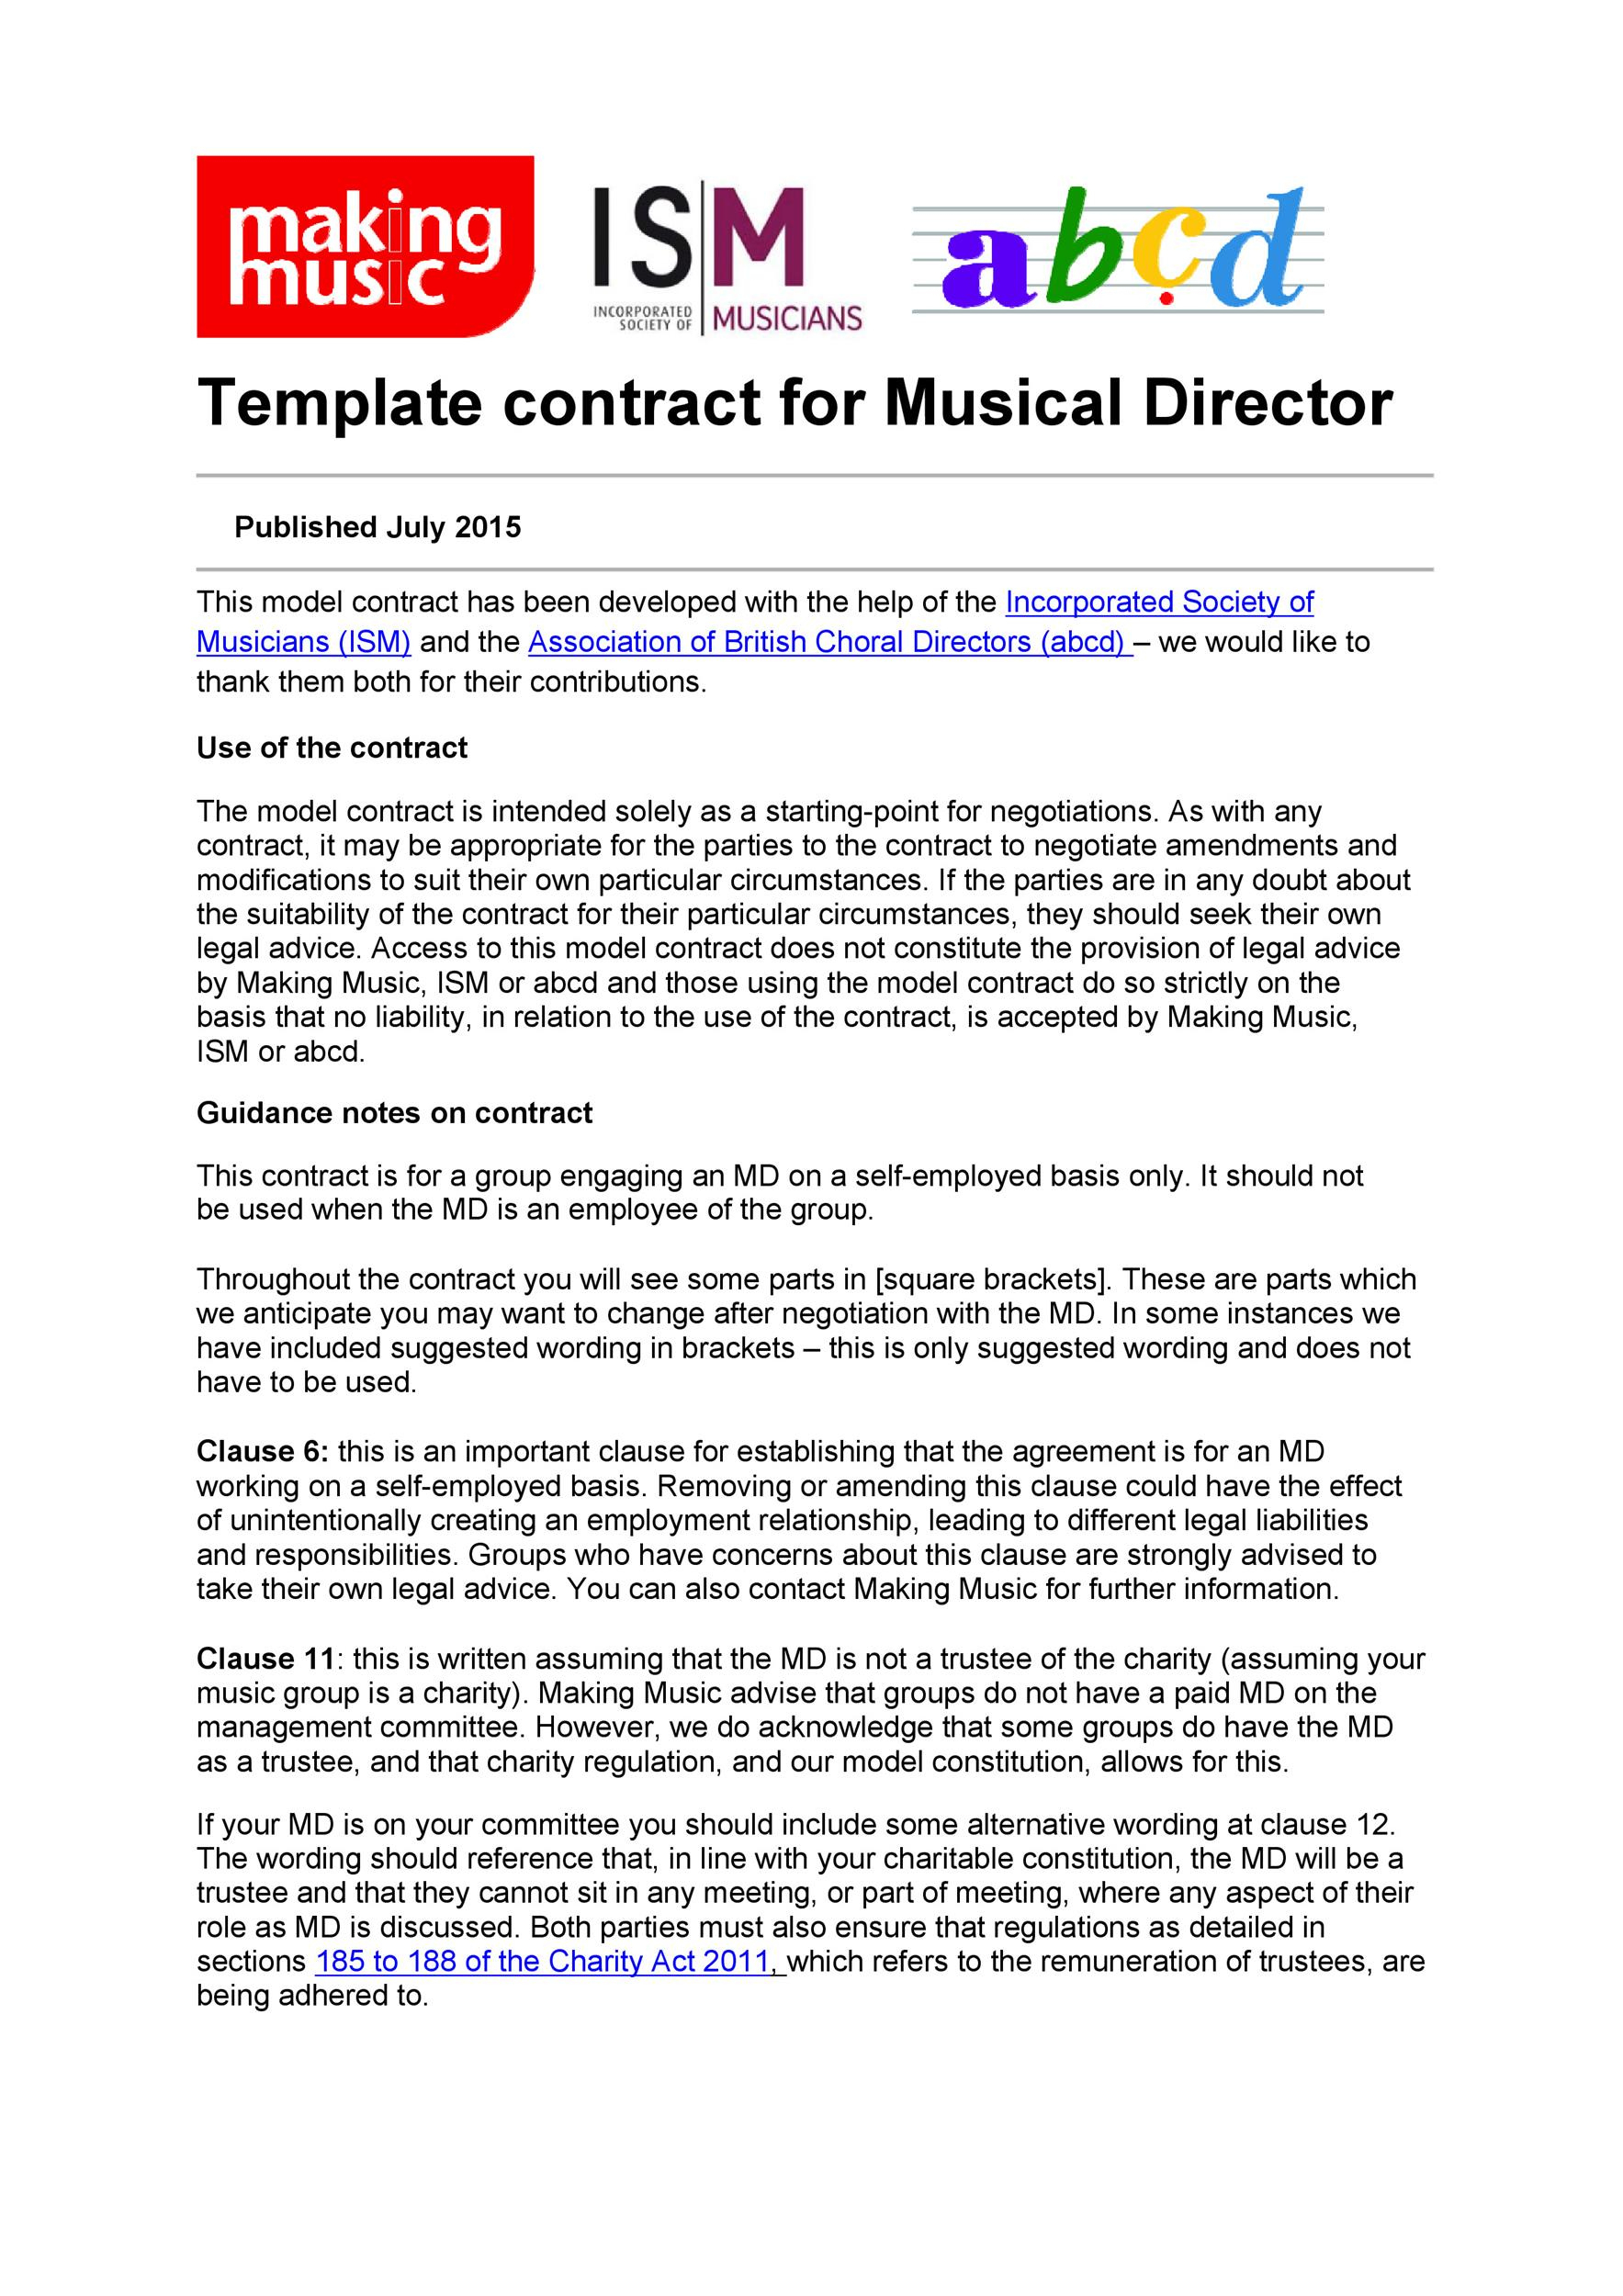 50 Artist Management Contract Templates (Ms Word) ᐅ Templatelab within Fresh Artist Manager Contract Template